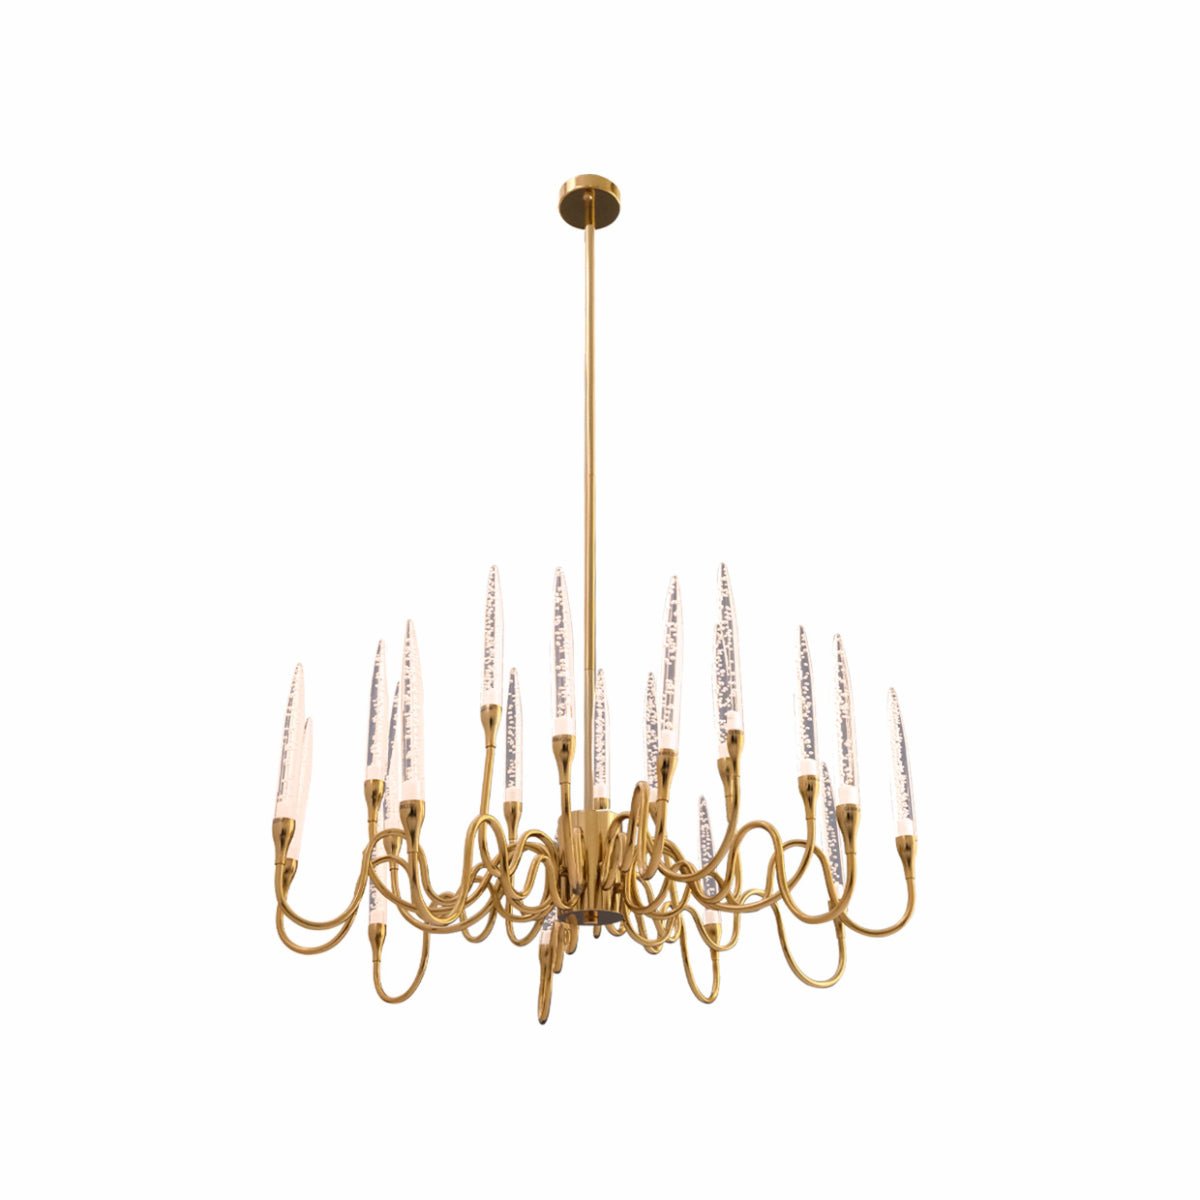 Main image of Candle French Mediterranean  Tiered Gold Finishing Chandelier Ceiling Light with 20xG4 | TEKLED 159-17518